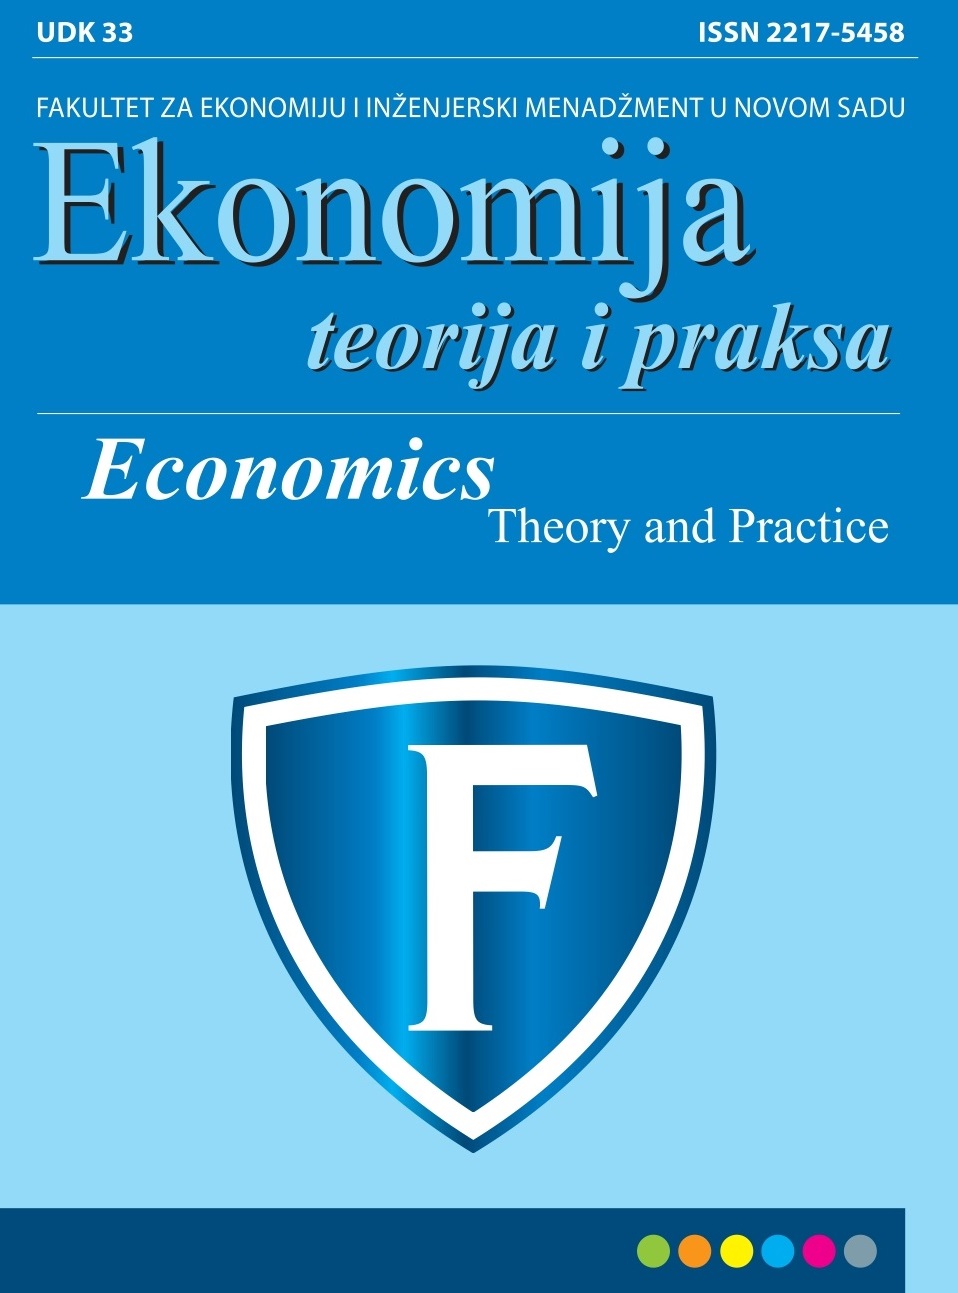 					View Vol. 11 No. 4 (2018): Economics - Theory and Practice
				